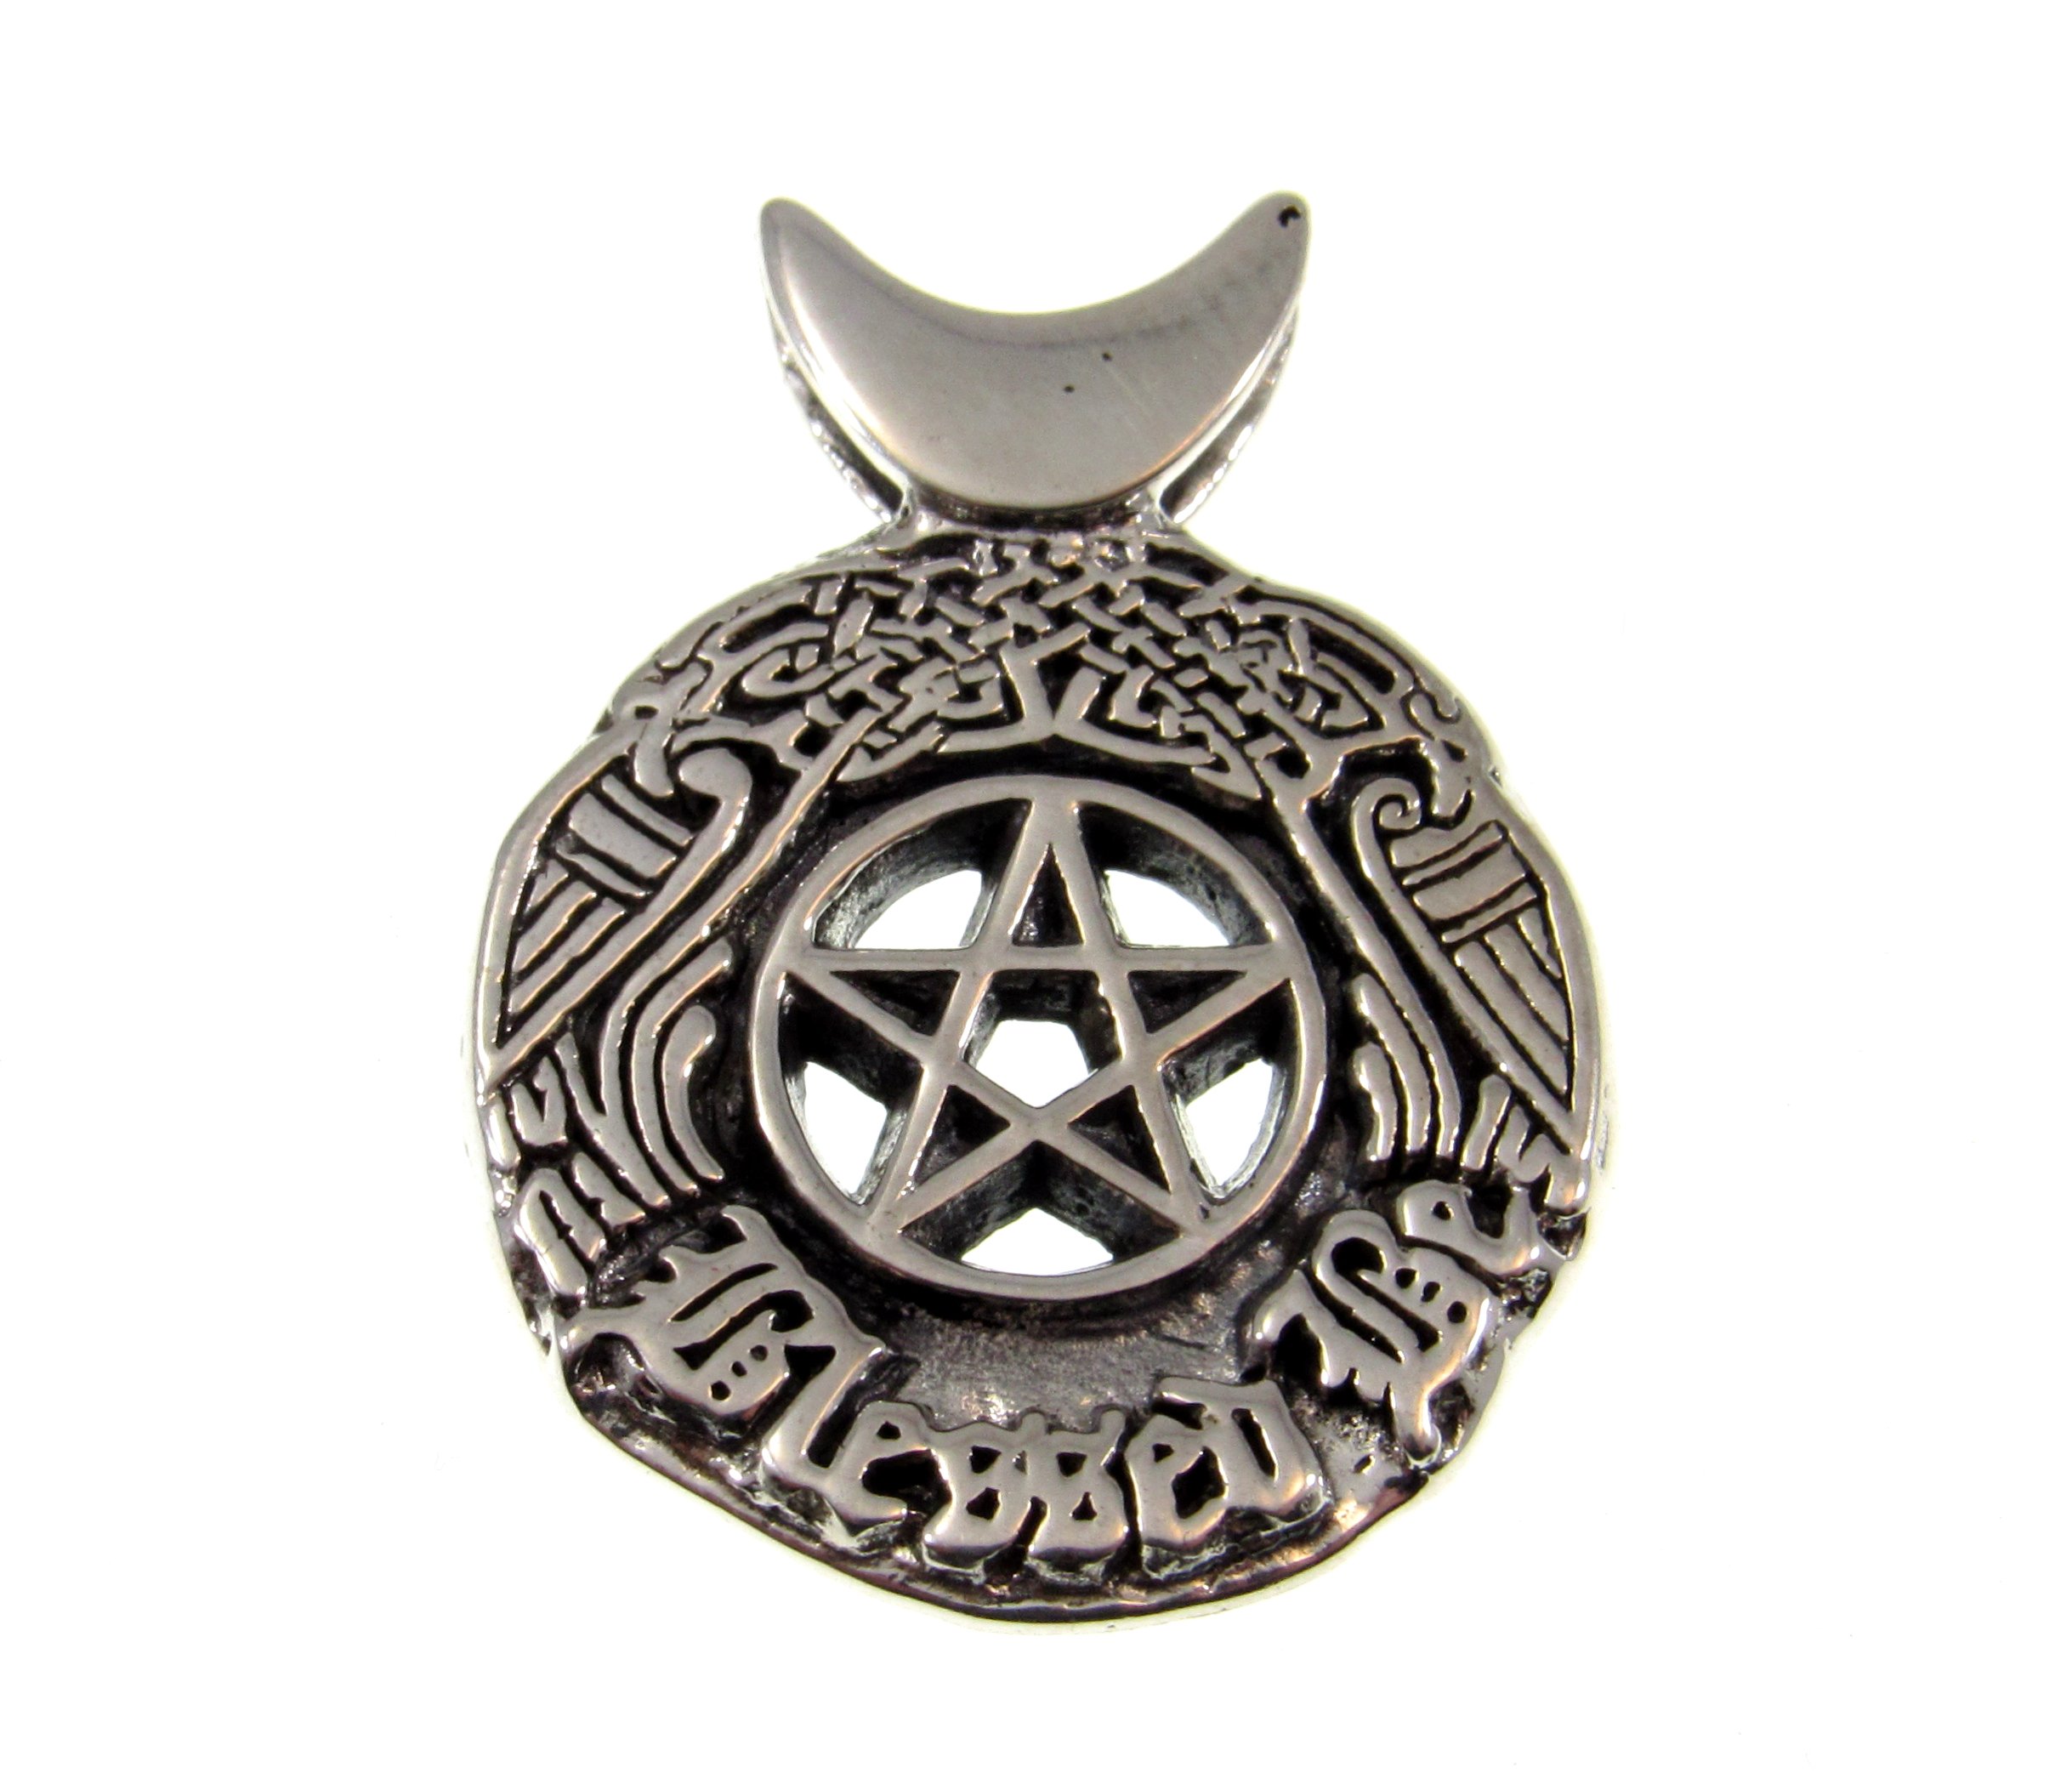 Magick jewelry Occult jewelry Goetic demon Pagan jewelry Rune necklace Pentacle necklace Necronomicon Necklace Decarabia Jewelry